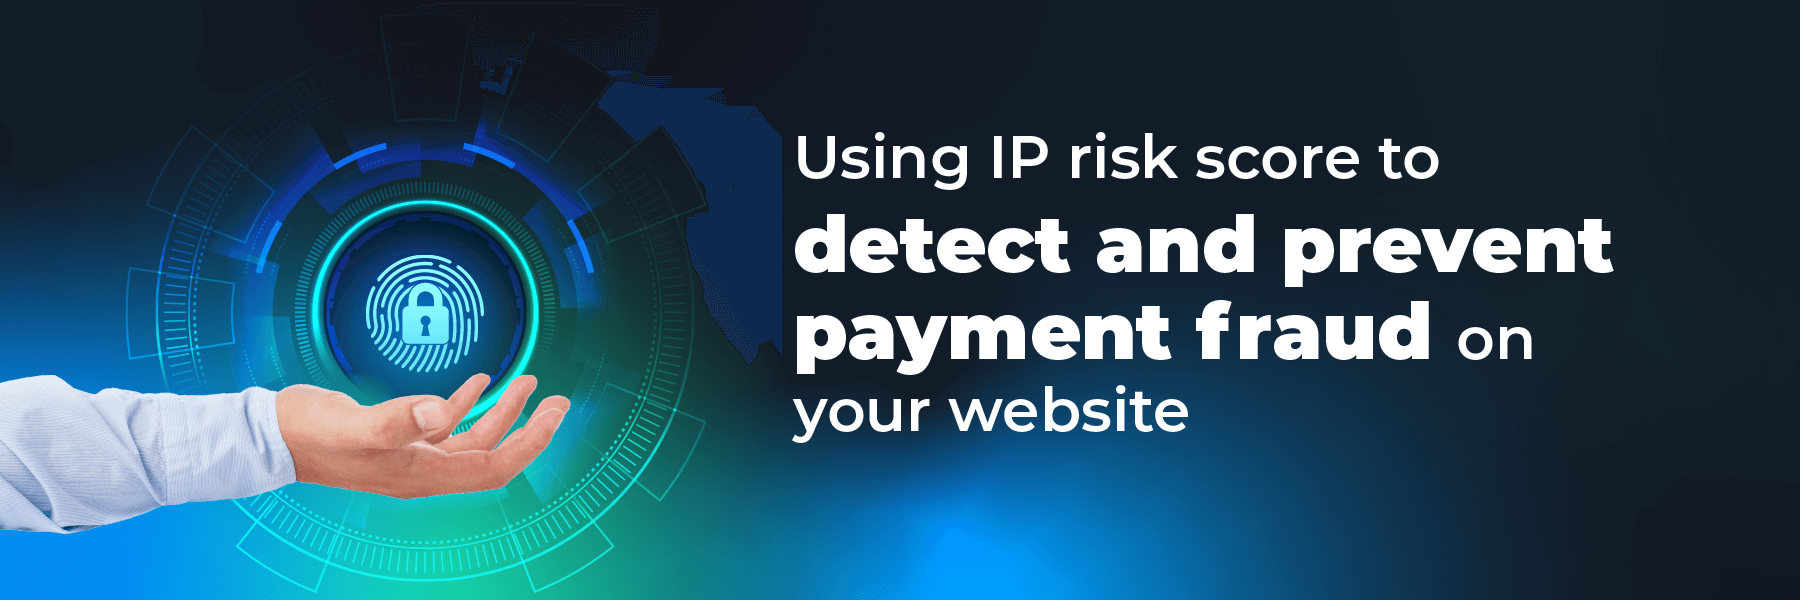  IP Risk score can prevent payment fraud